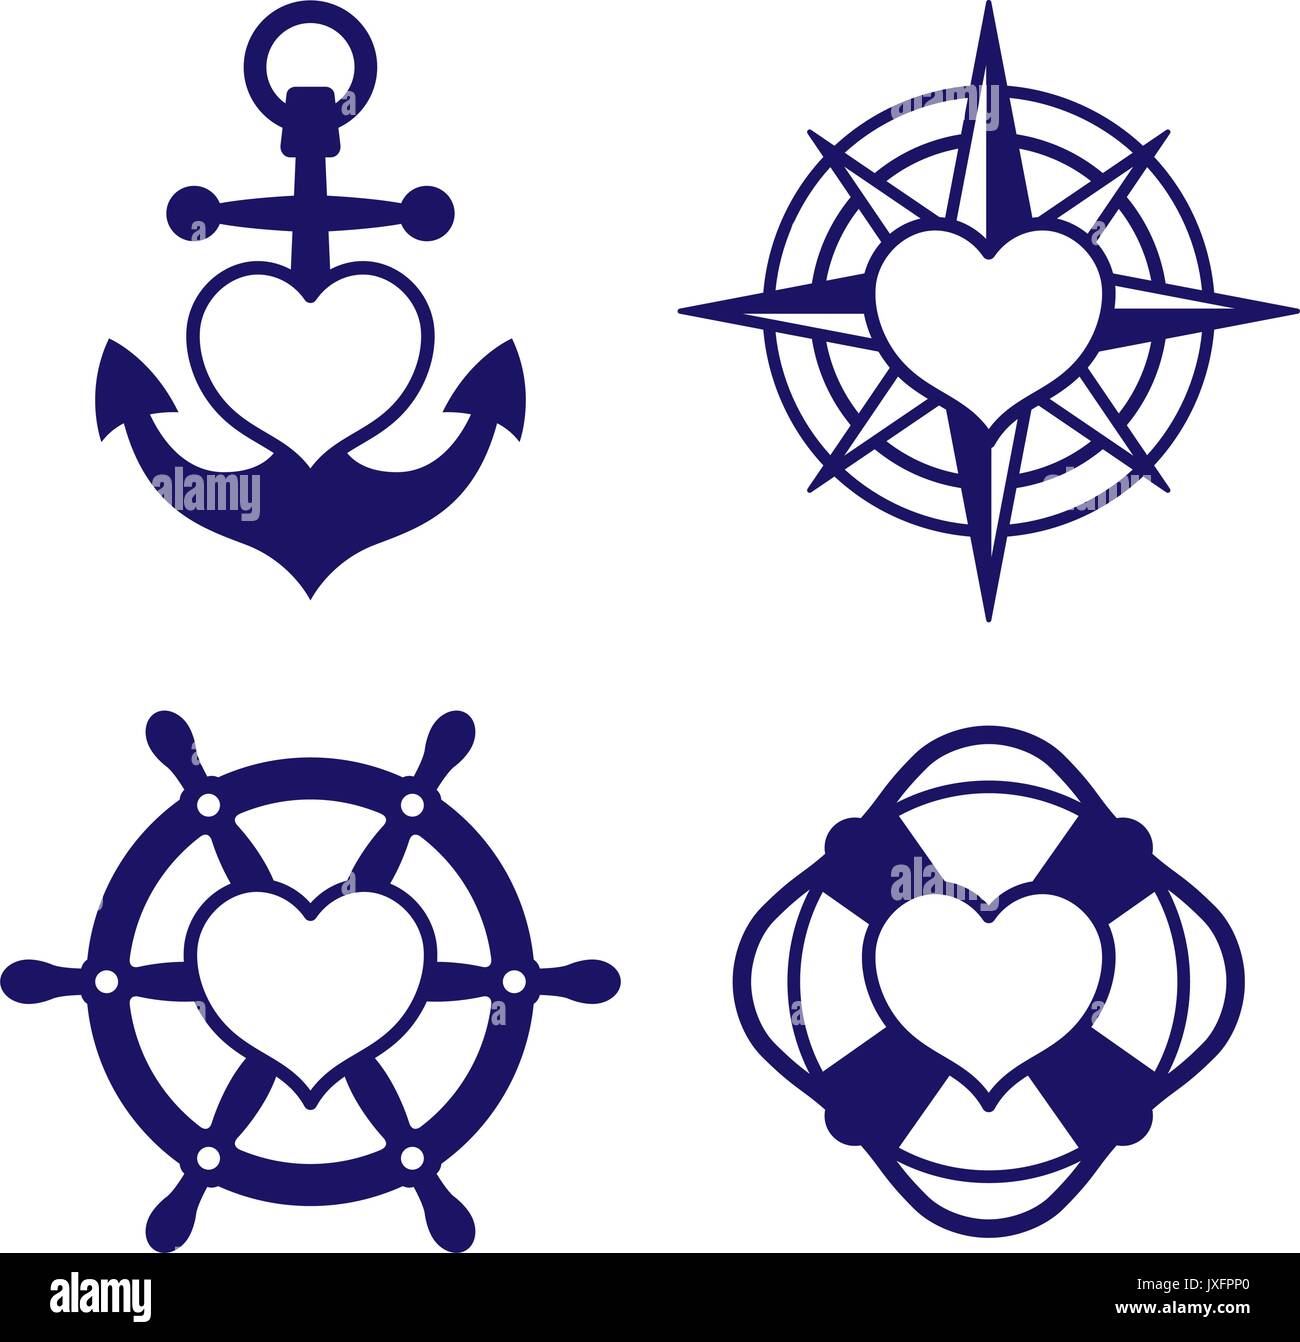 Set of four single color blue icons - marine theme with hearts inside shapes of anchor, compass, ship steering wheel and lifebuoy. Vector Illustration Stock Vector